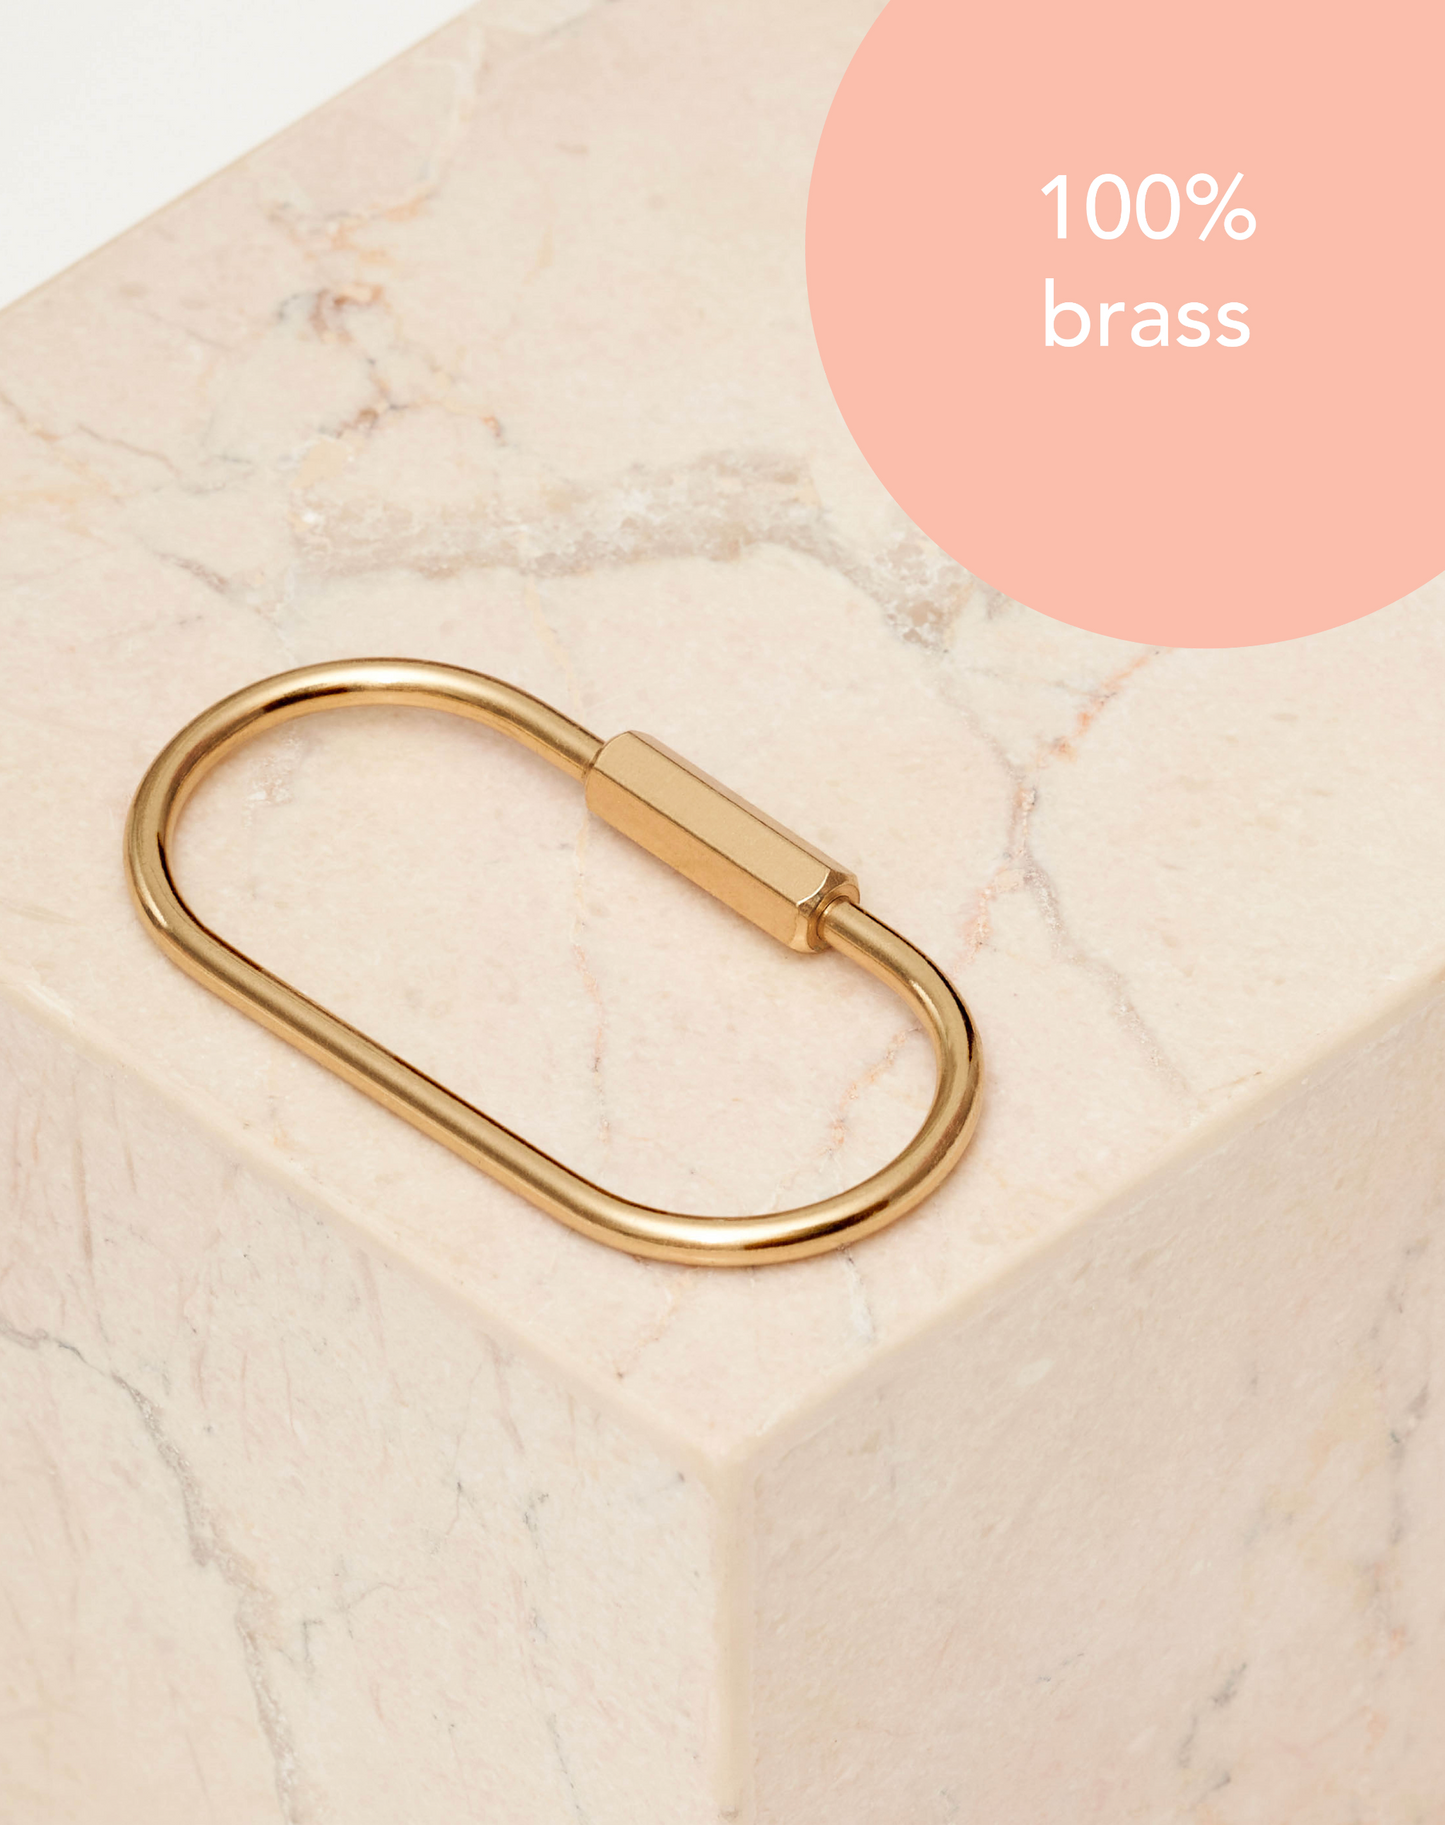 carabiner - special brass - oval